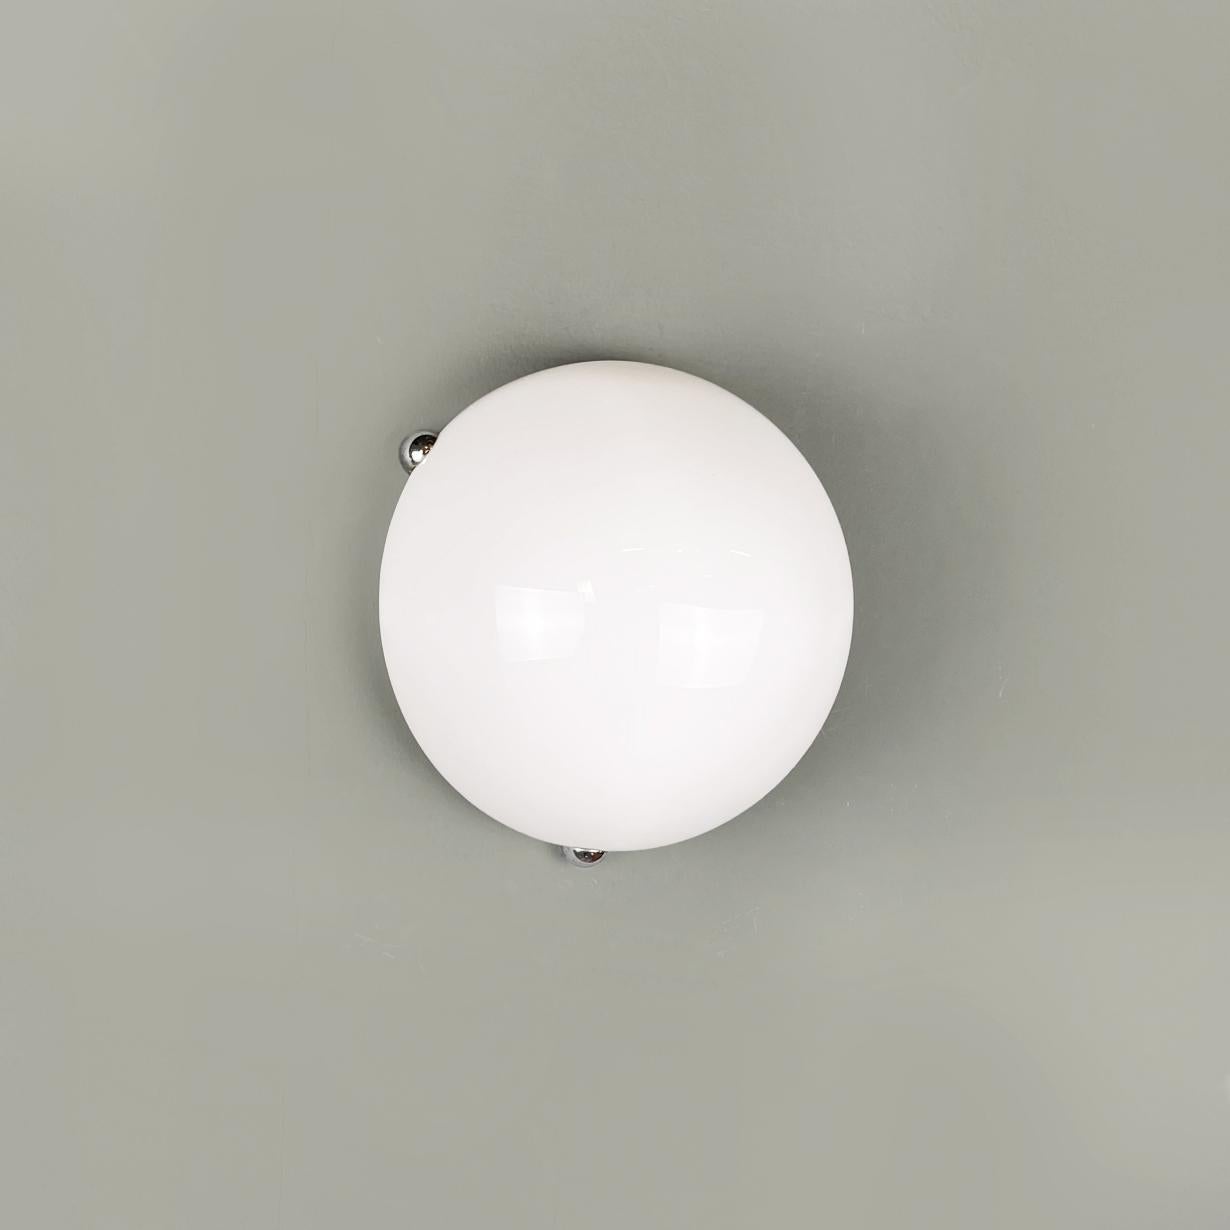 Italian modern White plexiglass wall light mod. Dalca by Gigi and Pepe Tanzi, 1970s
Small and pretty wall light mod. Dalca with hemispherical shape in white plexiglass. The lampshade is supported by a metal structure that ends with metal